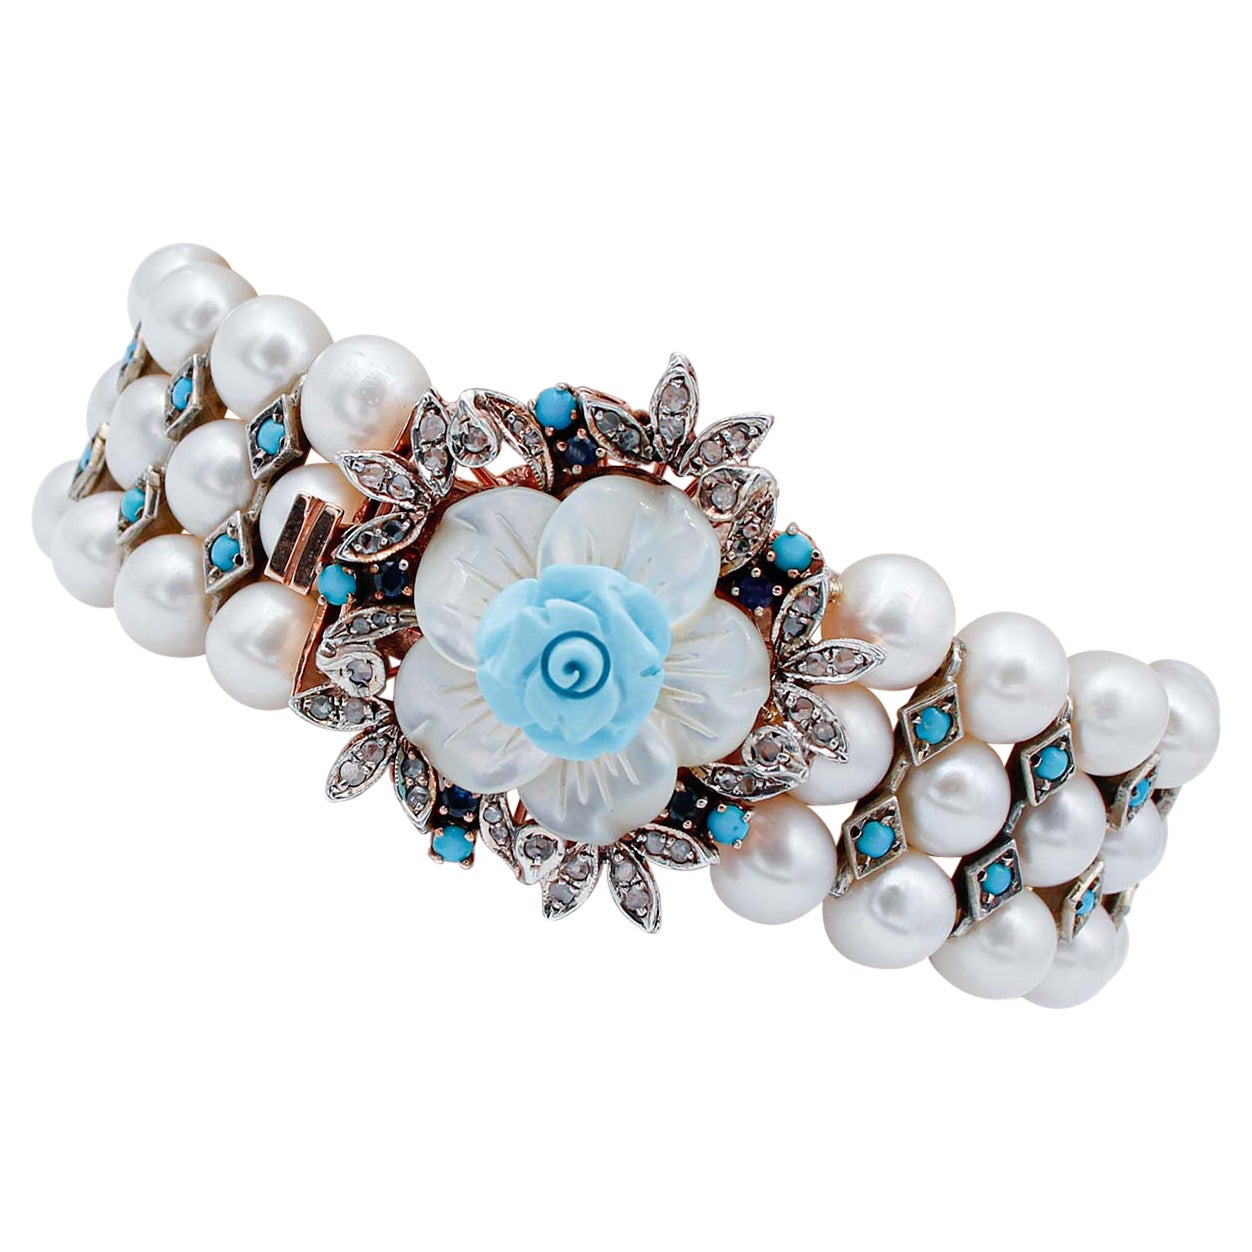 Pearls, Sapphires, Diamonds, Turquoises,  Stone, 14Kt Gold and Silver Bracelet